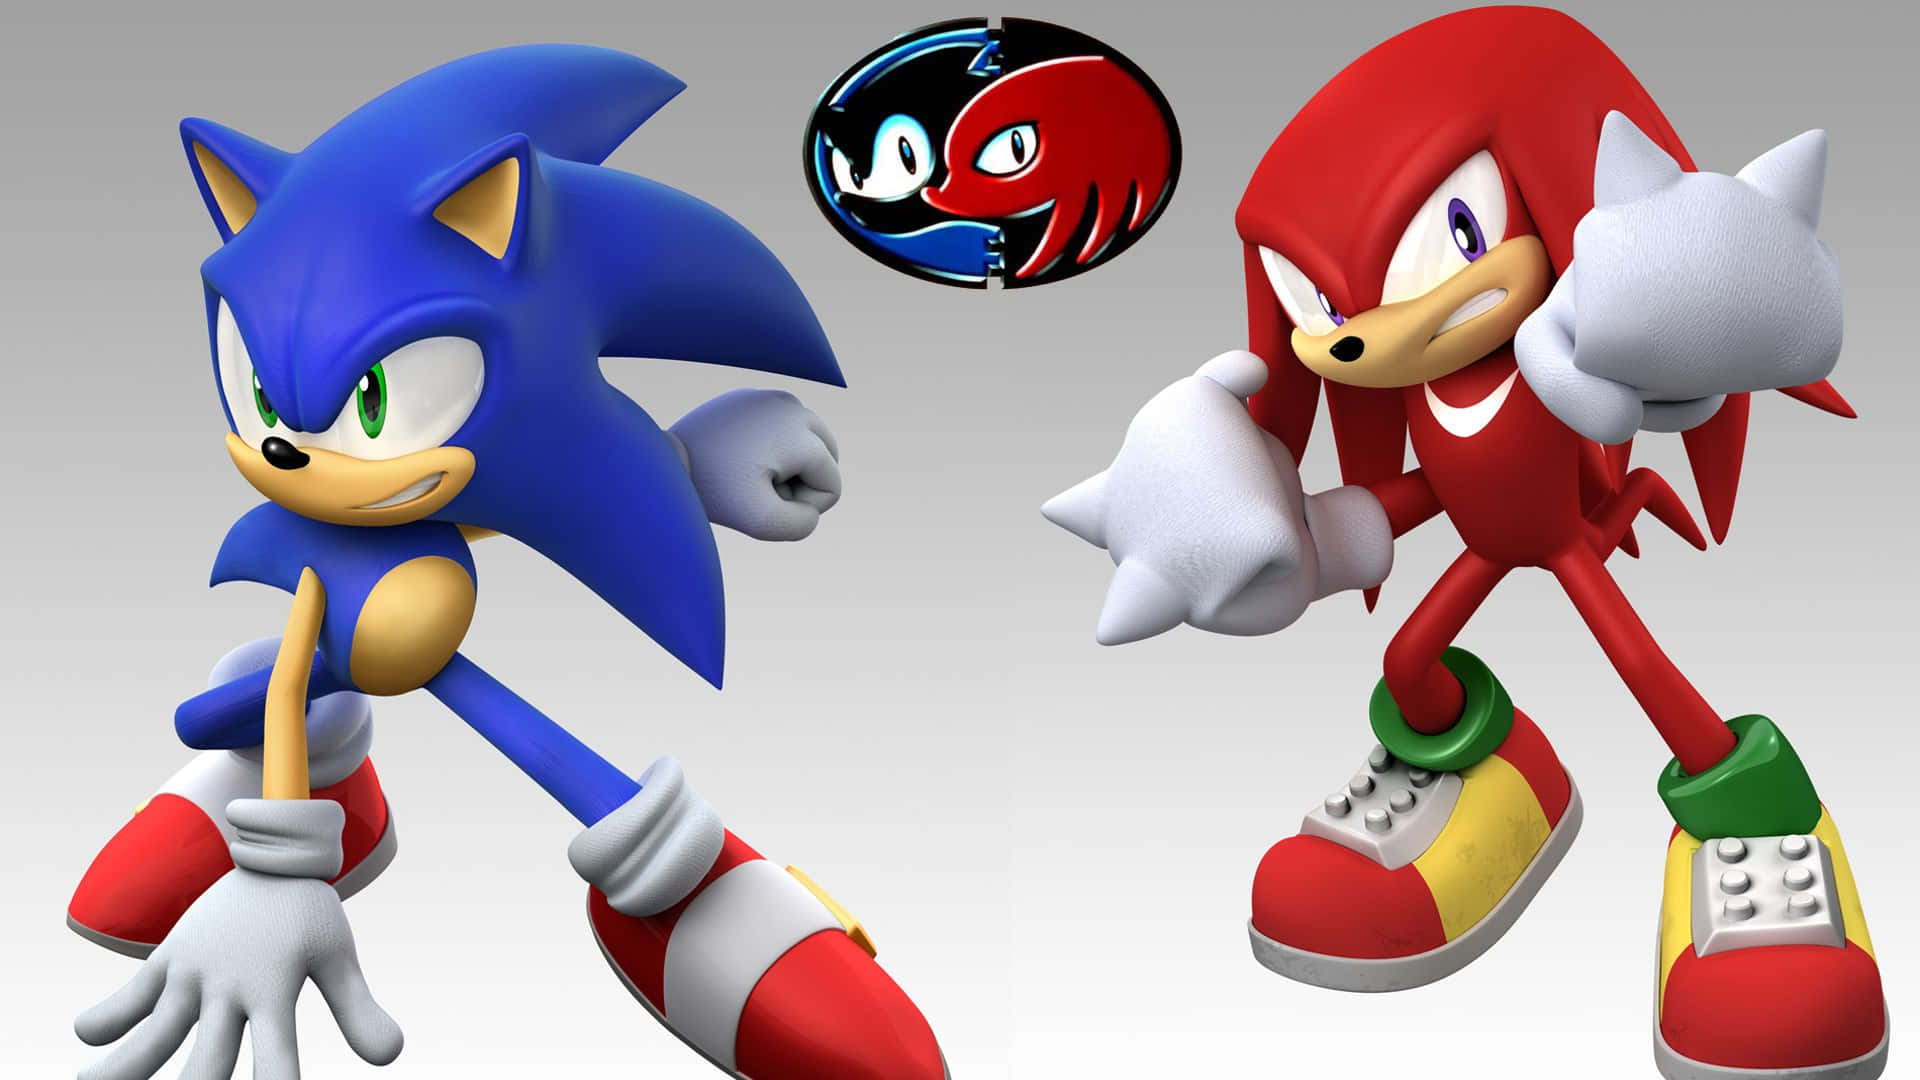 Knuckles From Sonic The Hedgehog Fame